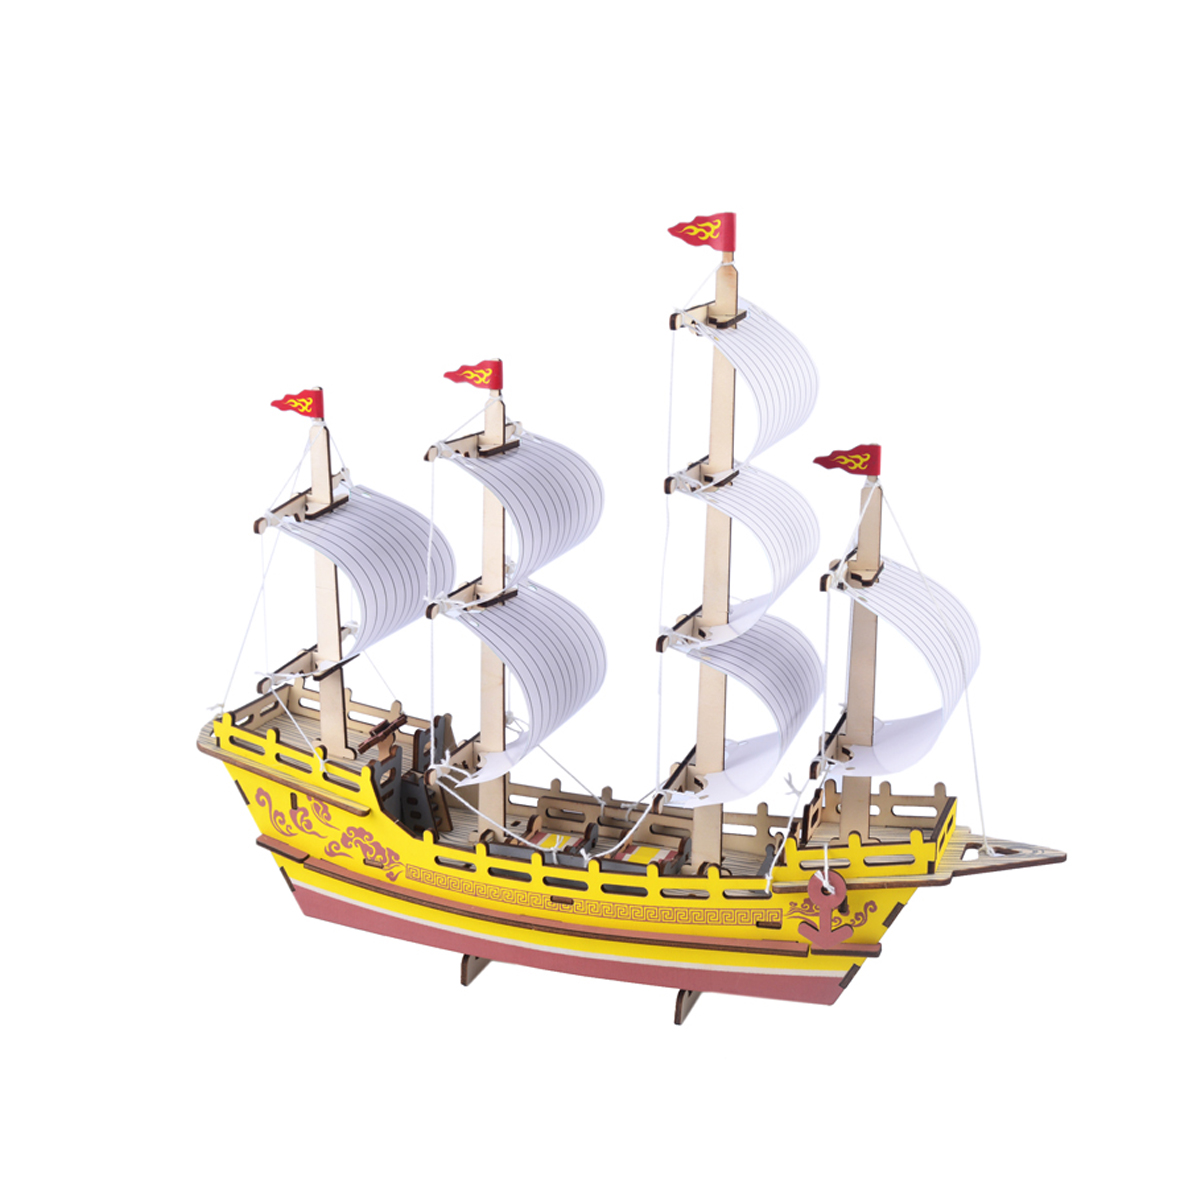 3D-Woodcraft-Assembly-Sailing-Series-Kit-Jigsaw-Puzzle-Decoration-Toy-Model-for-Kids-Gift-1635638-3